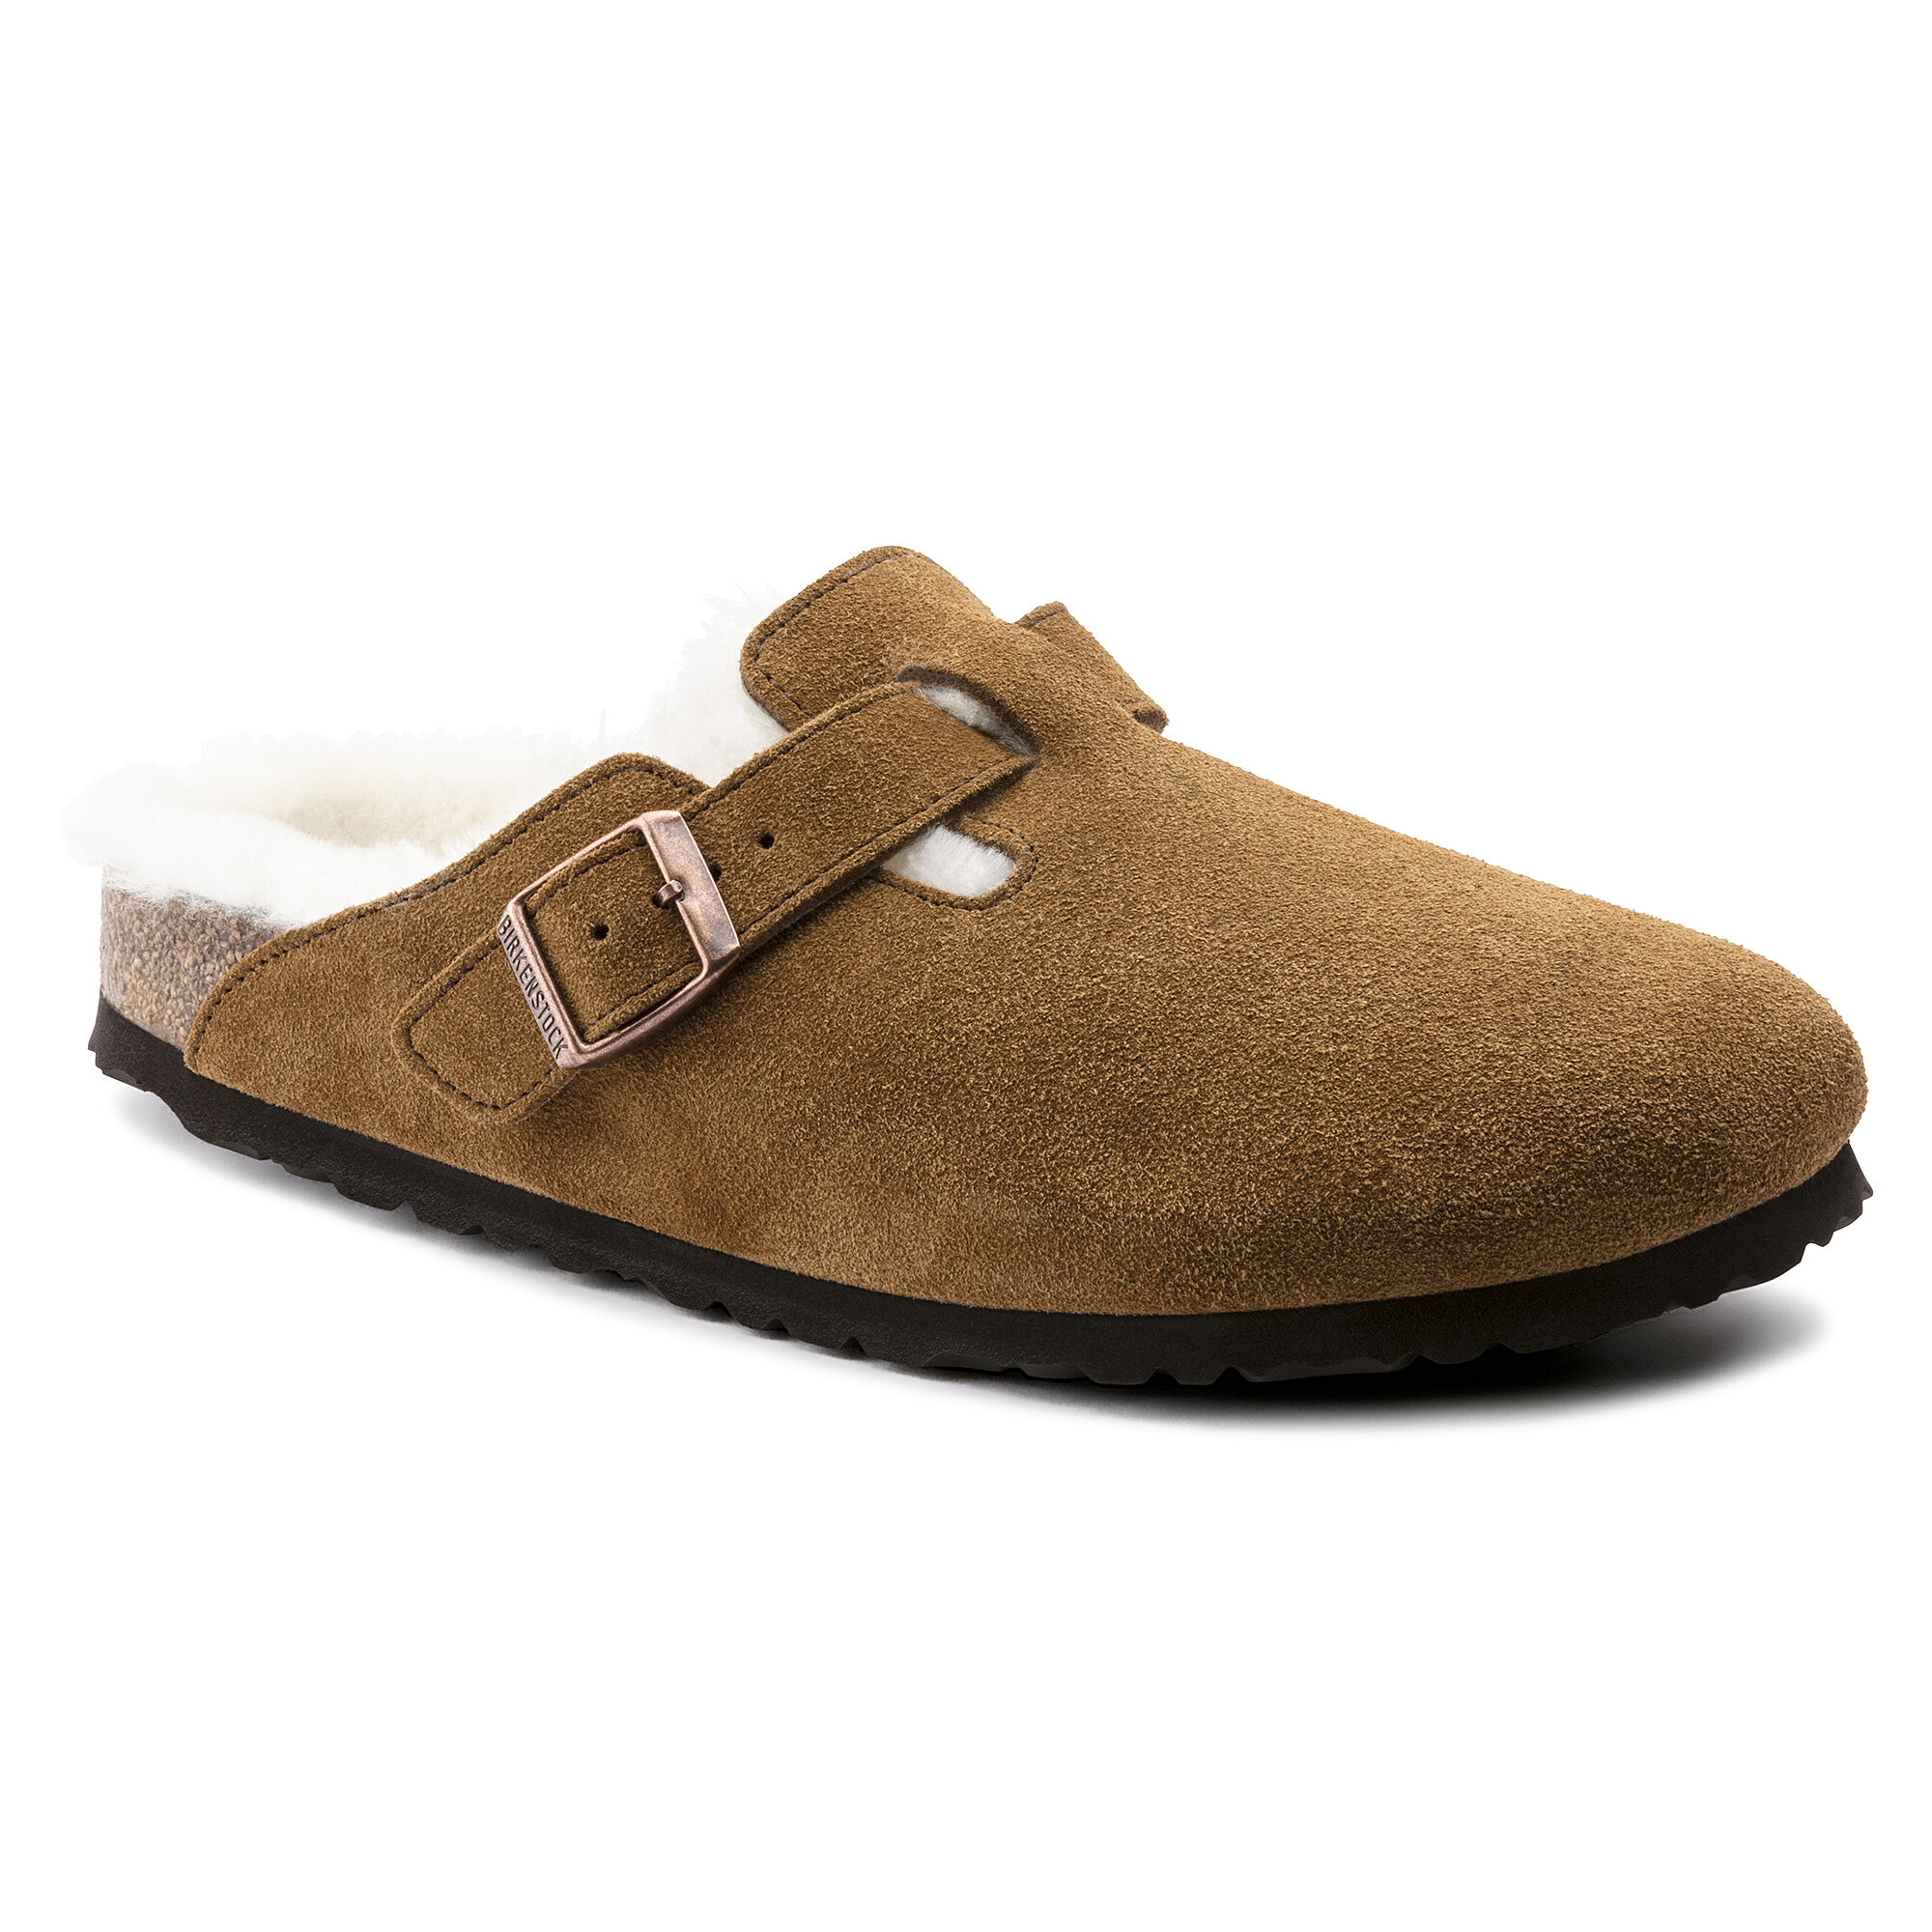 birkenstock clogs with strap